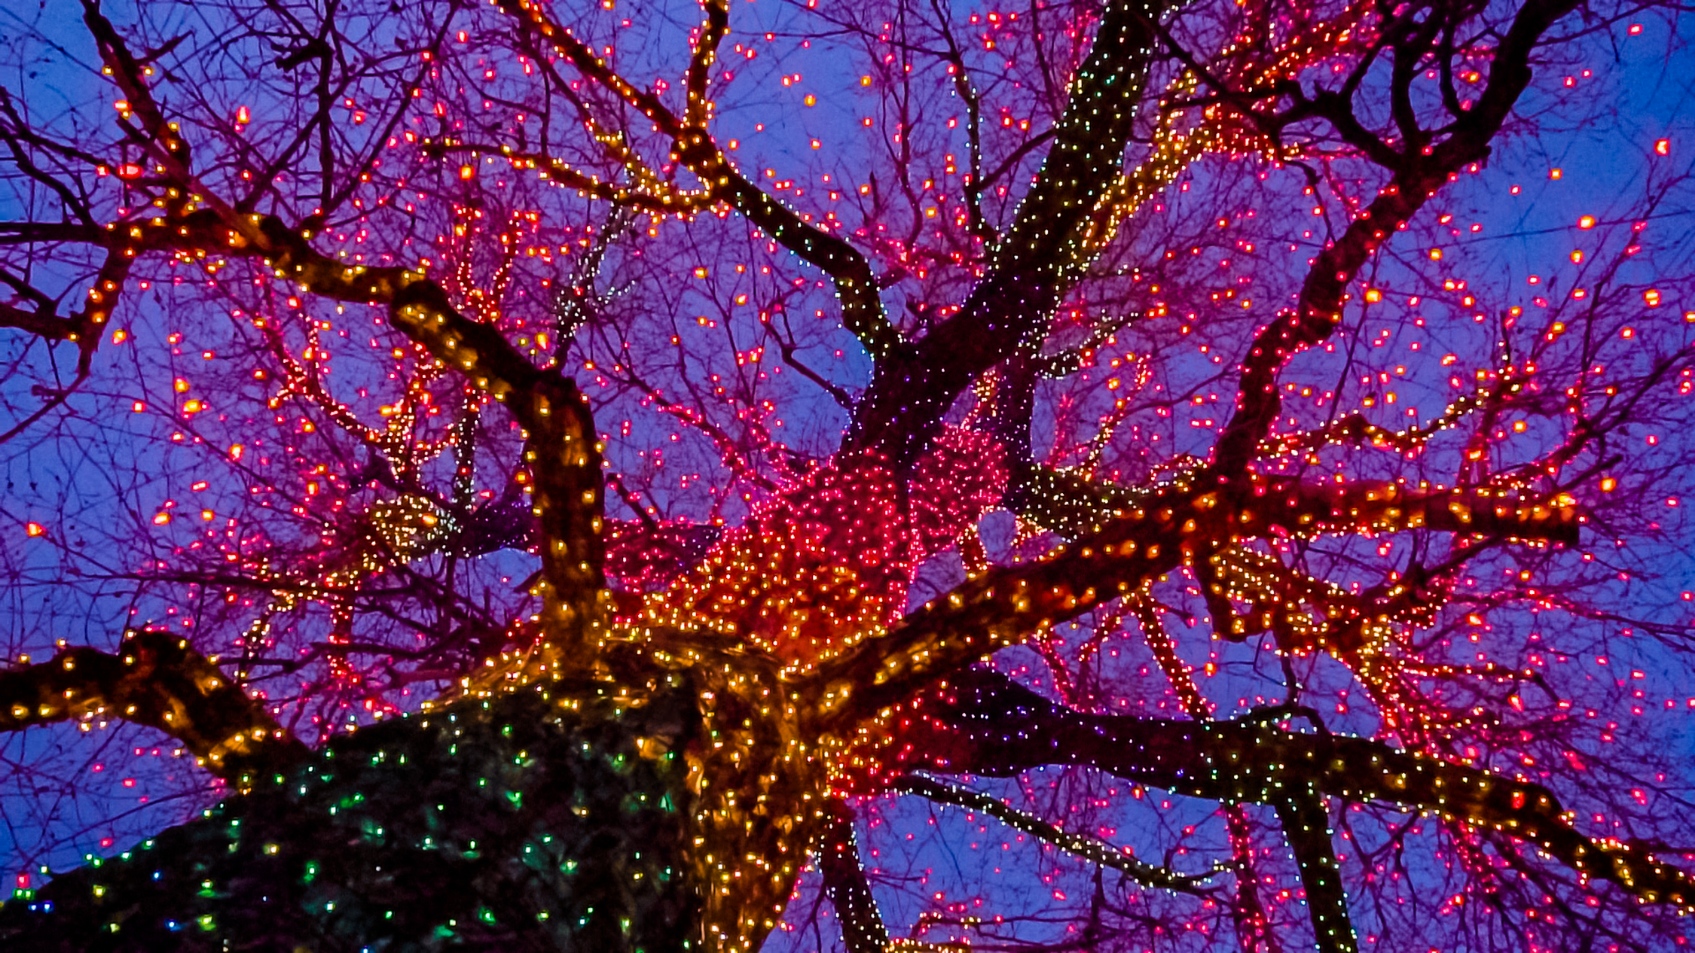 Glowing Christmas Lights And Trees Contact